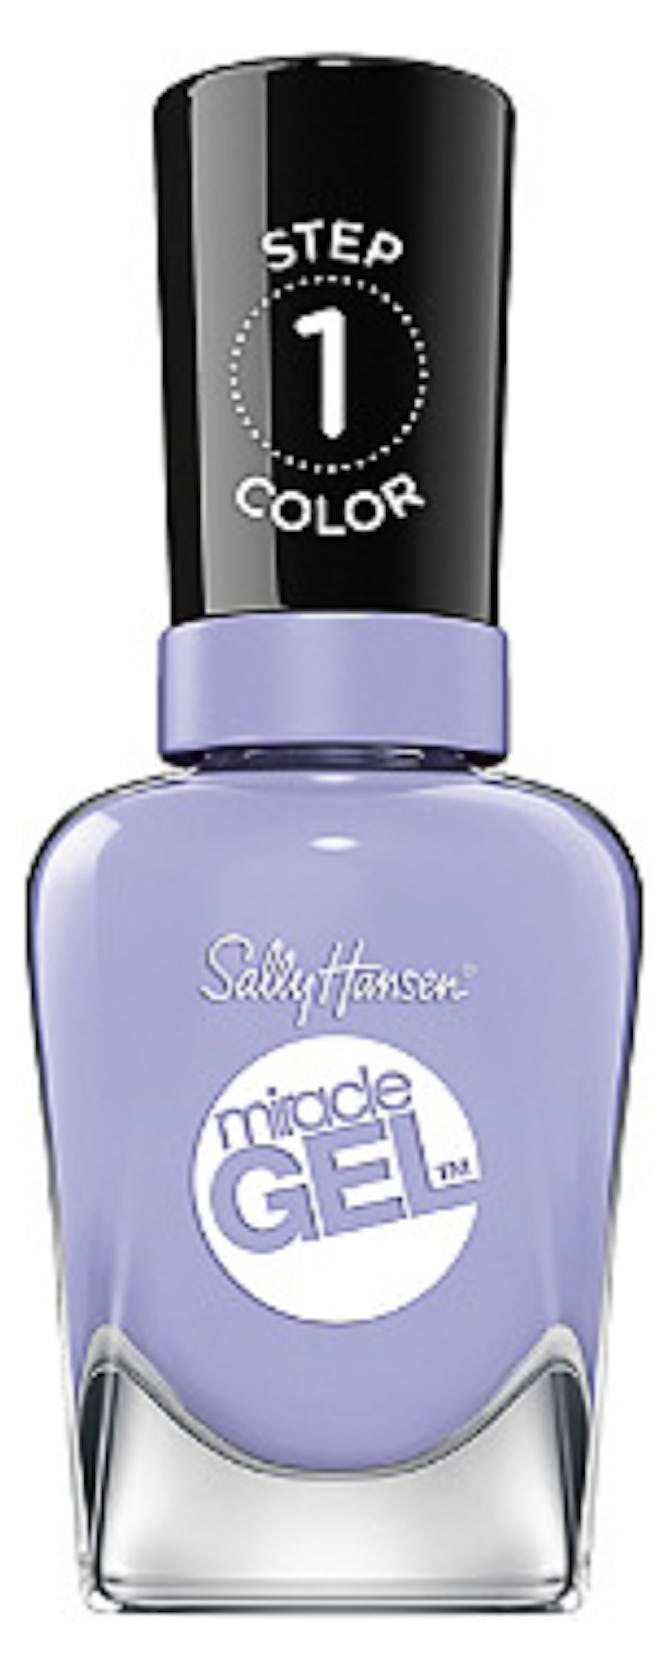 Sally Hansen Miracle Gel in Crying Out Cloud